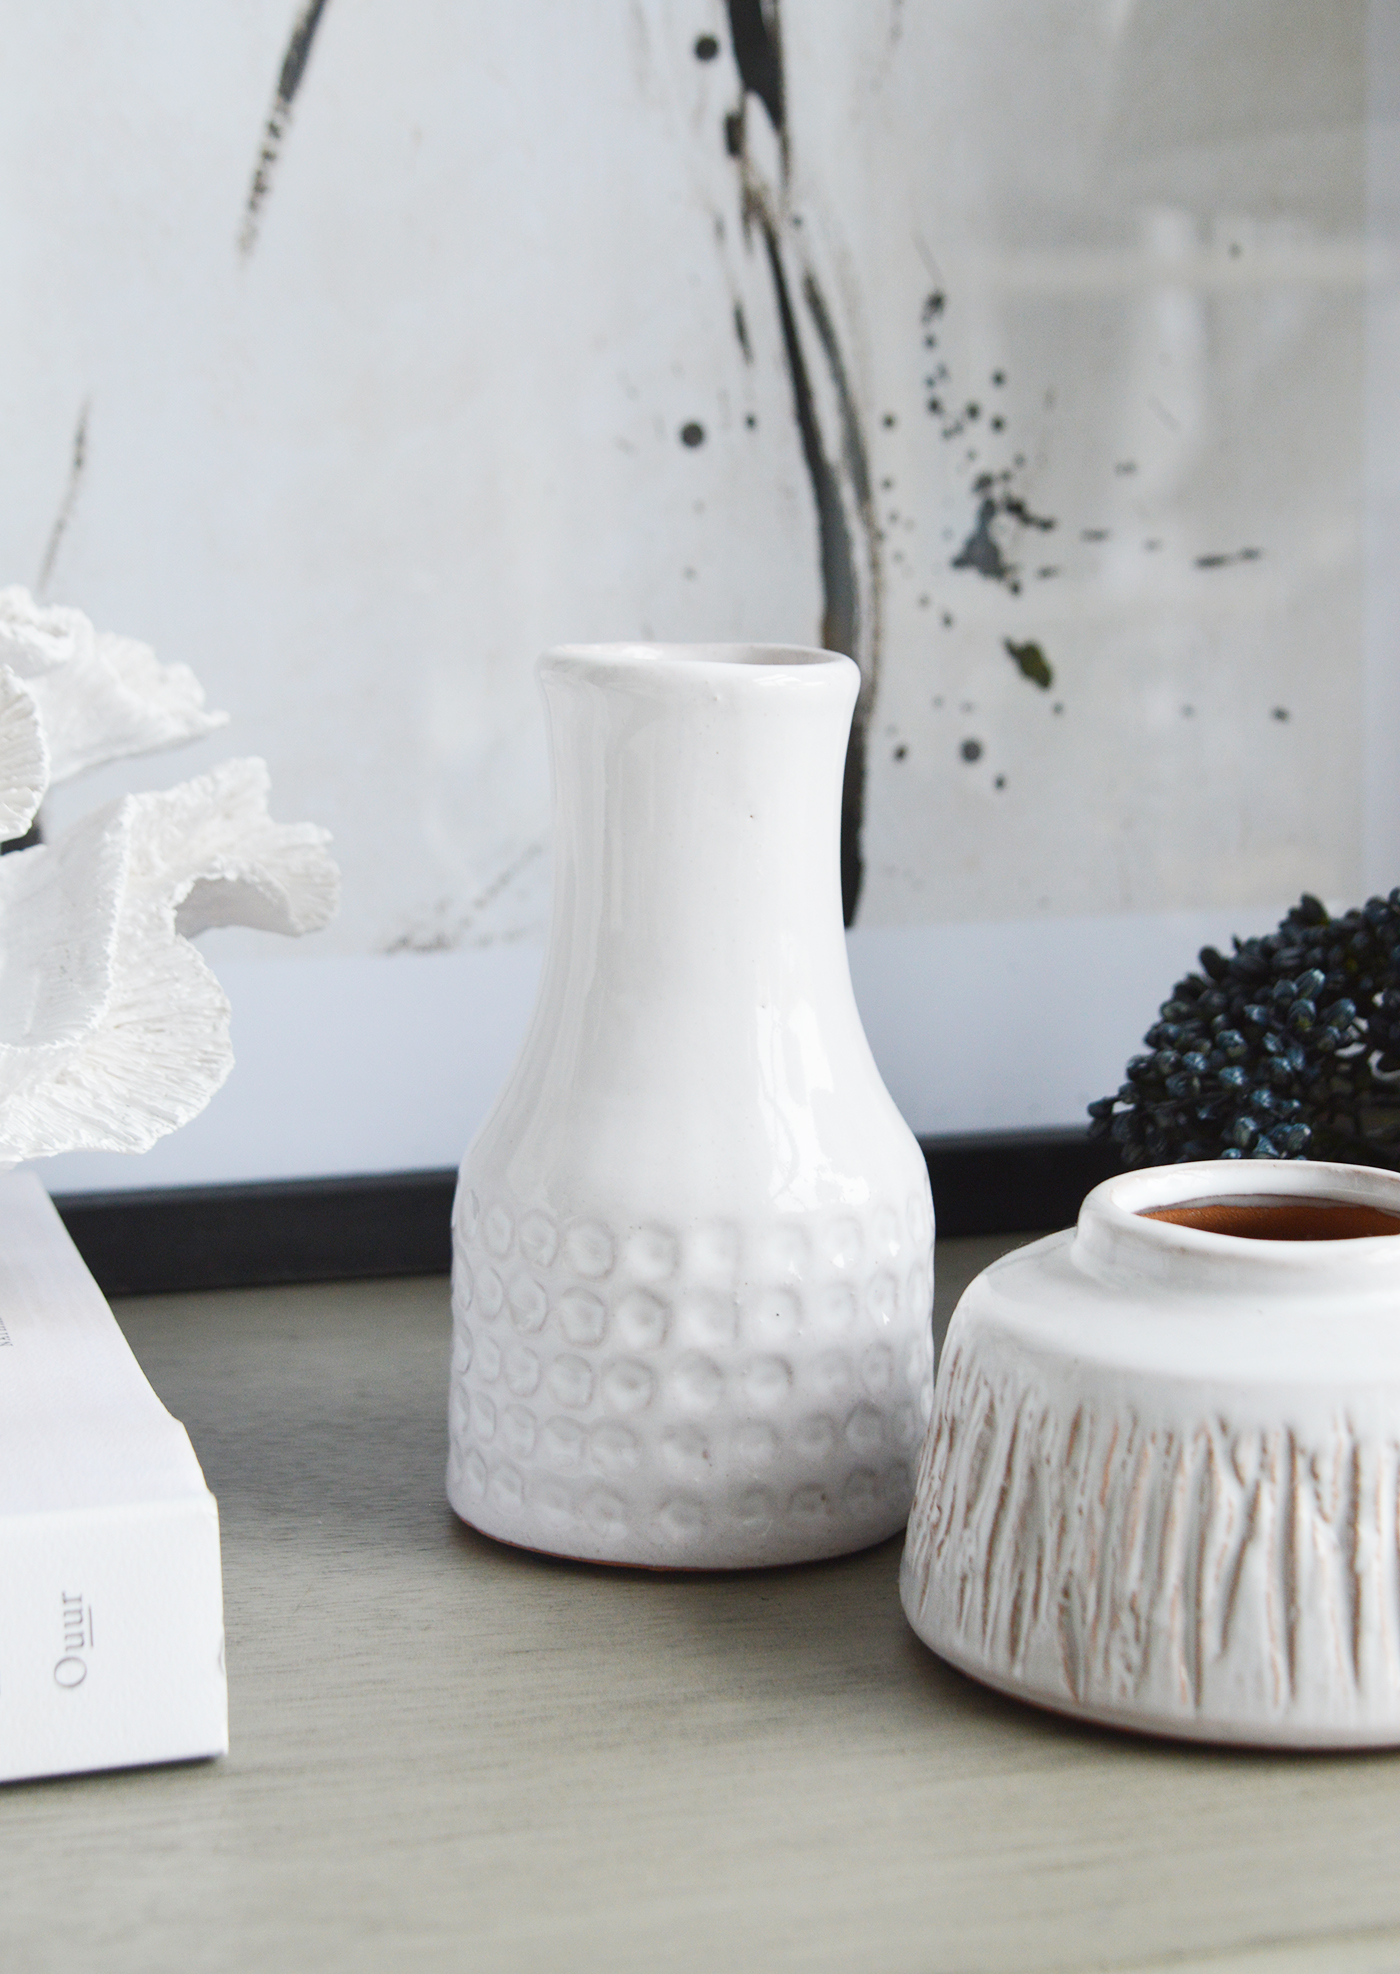 Harmony White Terracotta Vases - New England Coastal, Country and Farmhouse furniture and Interiors